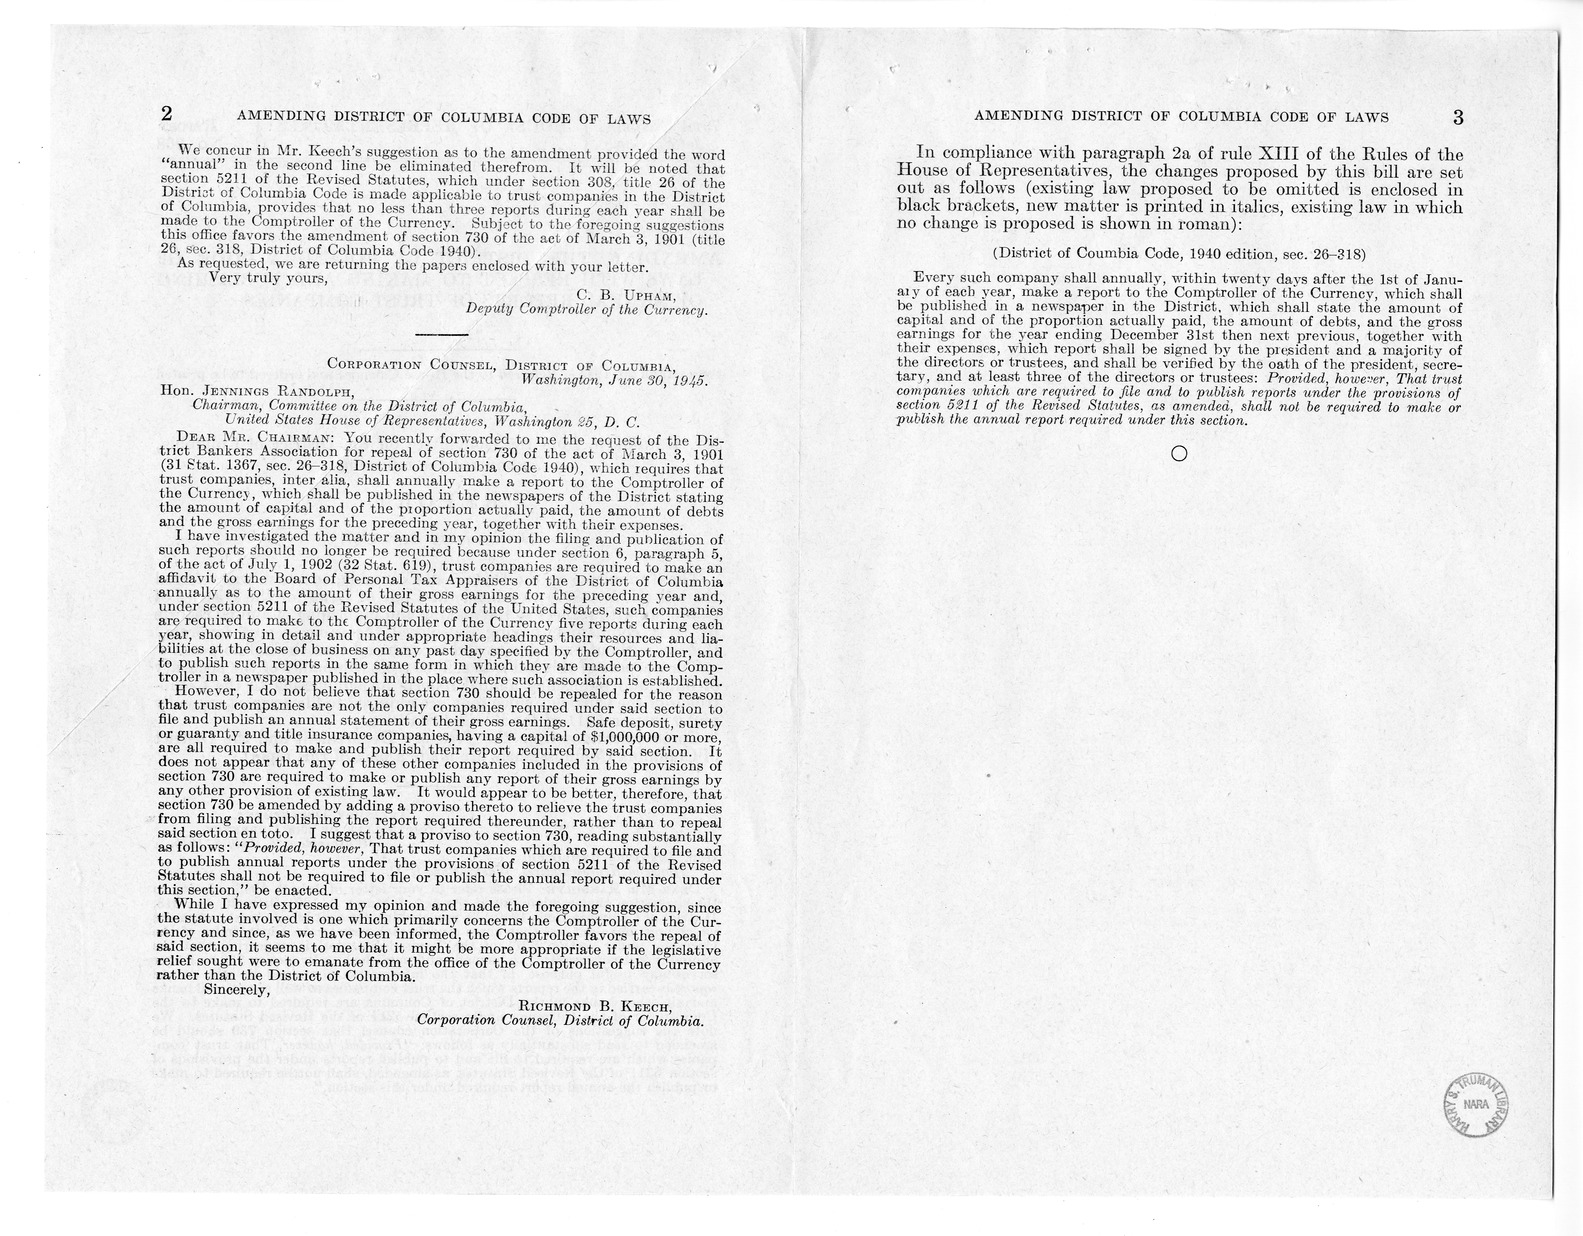 Memorandum from Frederick J. Bailey to M. C. Latta, H.R. 3867, To Amend the Code of Laws for the District of Columbia With Respect to the Making and Publishing of Annual Reports by Trust Companies, with Attachments